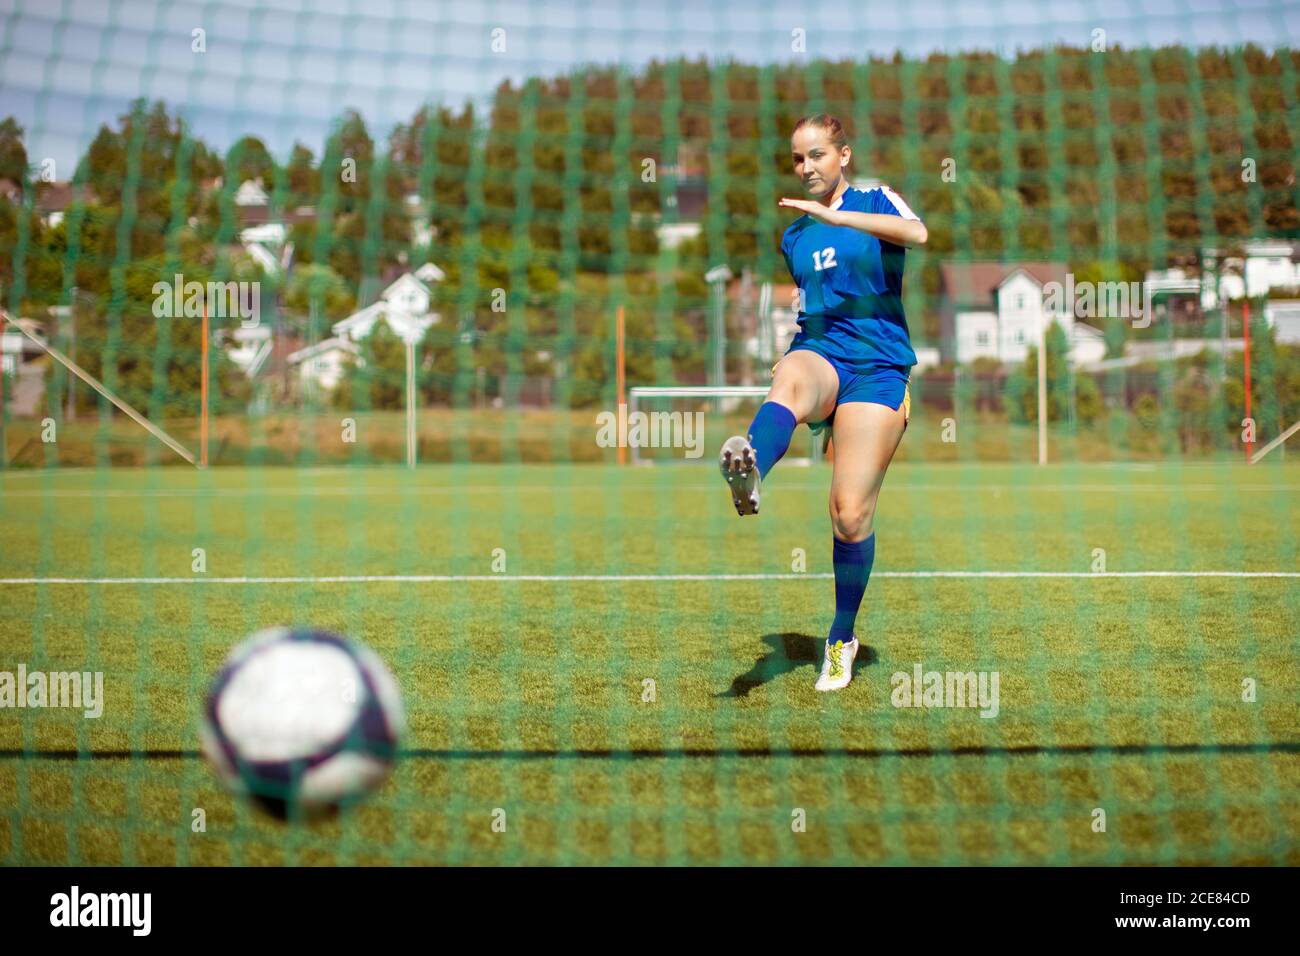 Female Athlete Shooting Ball Into Goal While Playing Football On Field Stock Photo Alamy